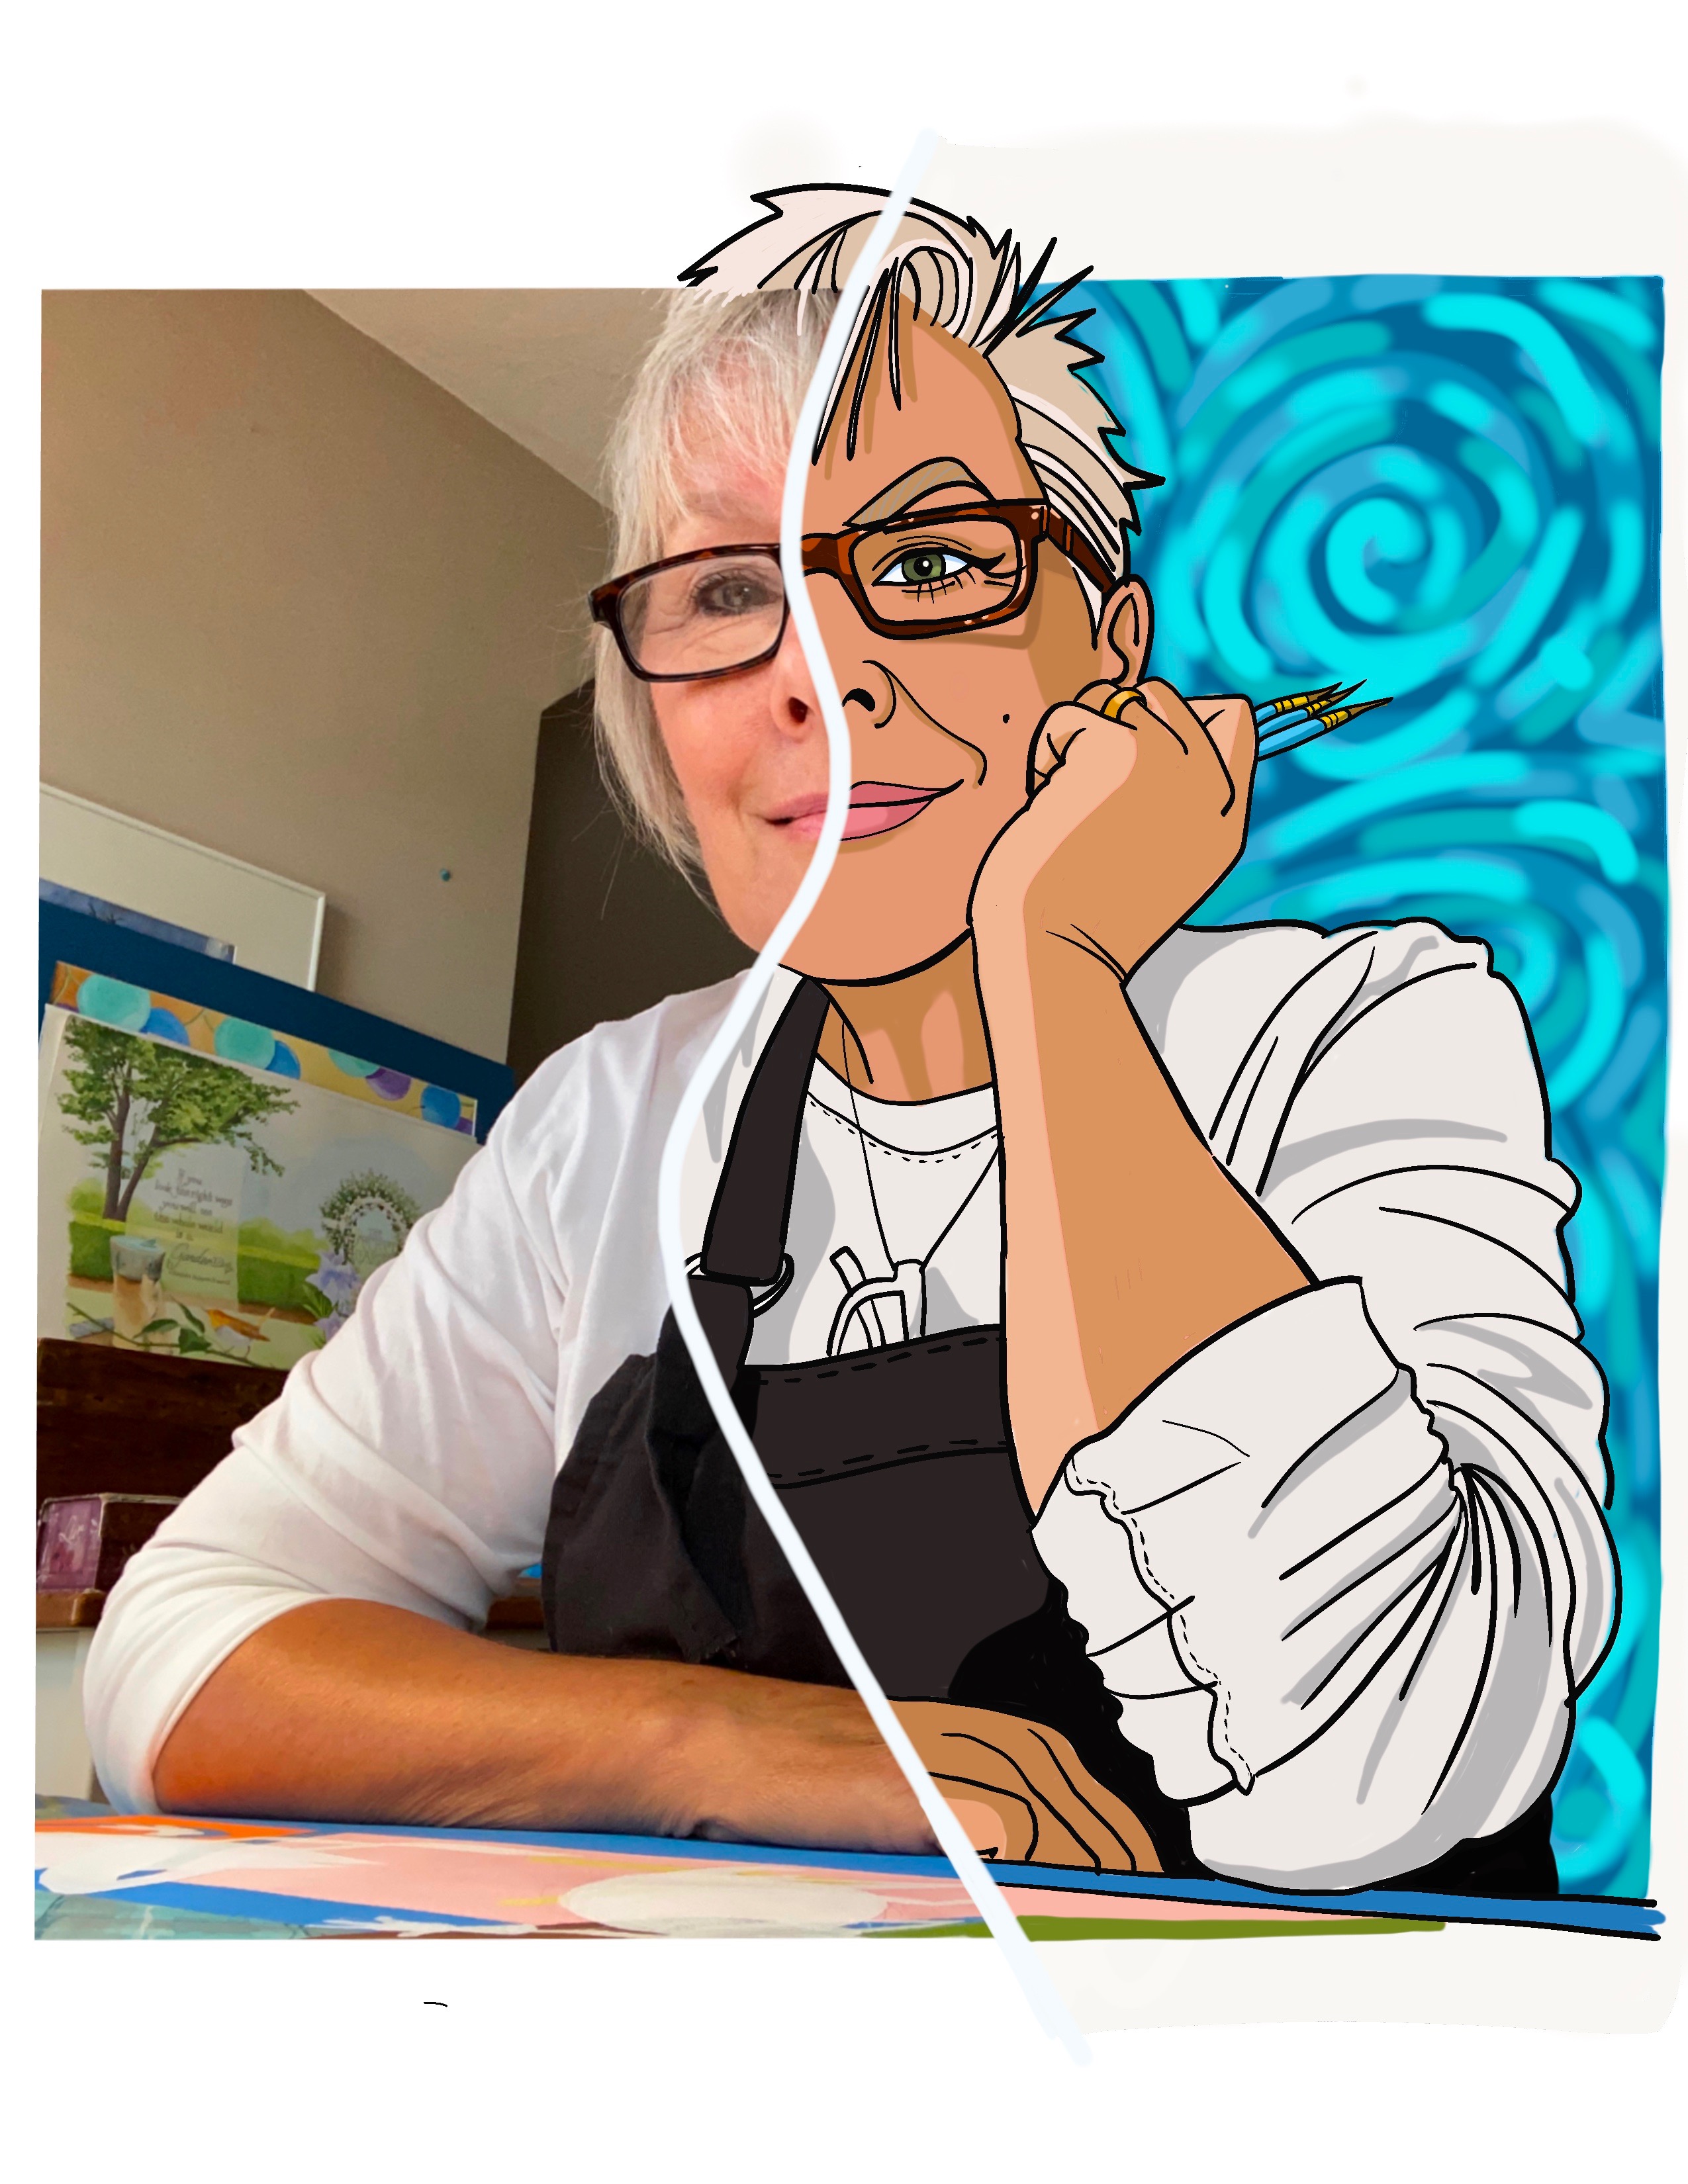 a photo portrait of woman with white hair, with one half of the portrait drawn as a cartoon with swirly background